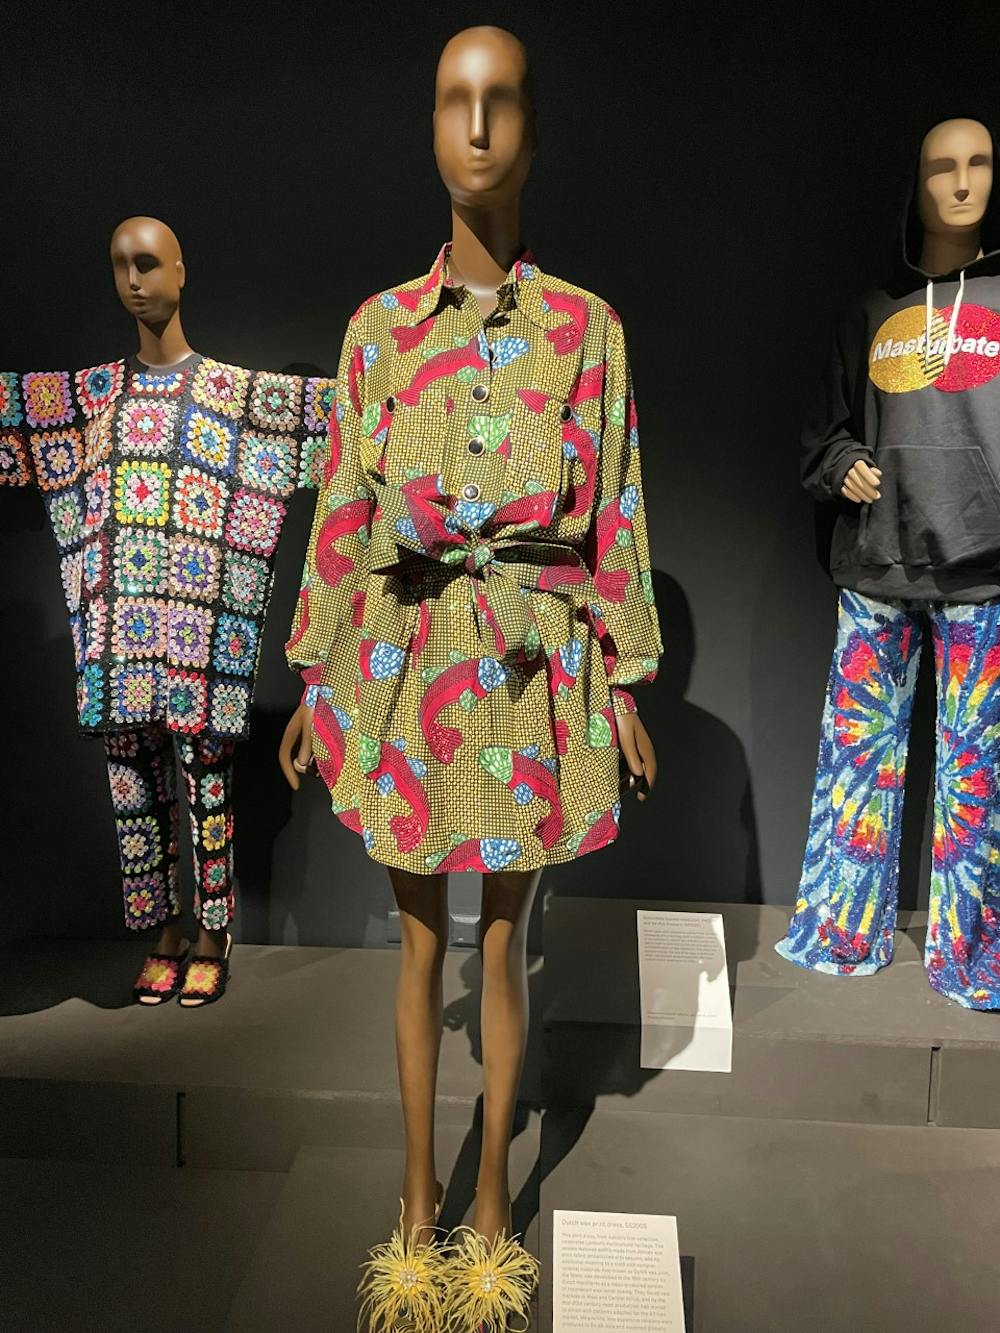 V&A show explores fashion and masculinity - Design Week